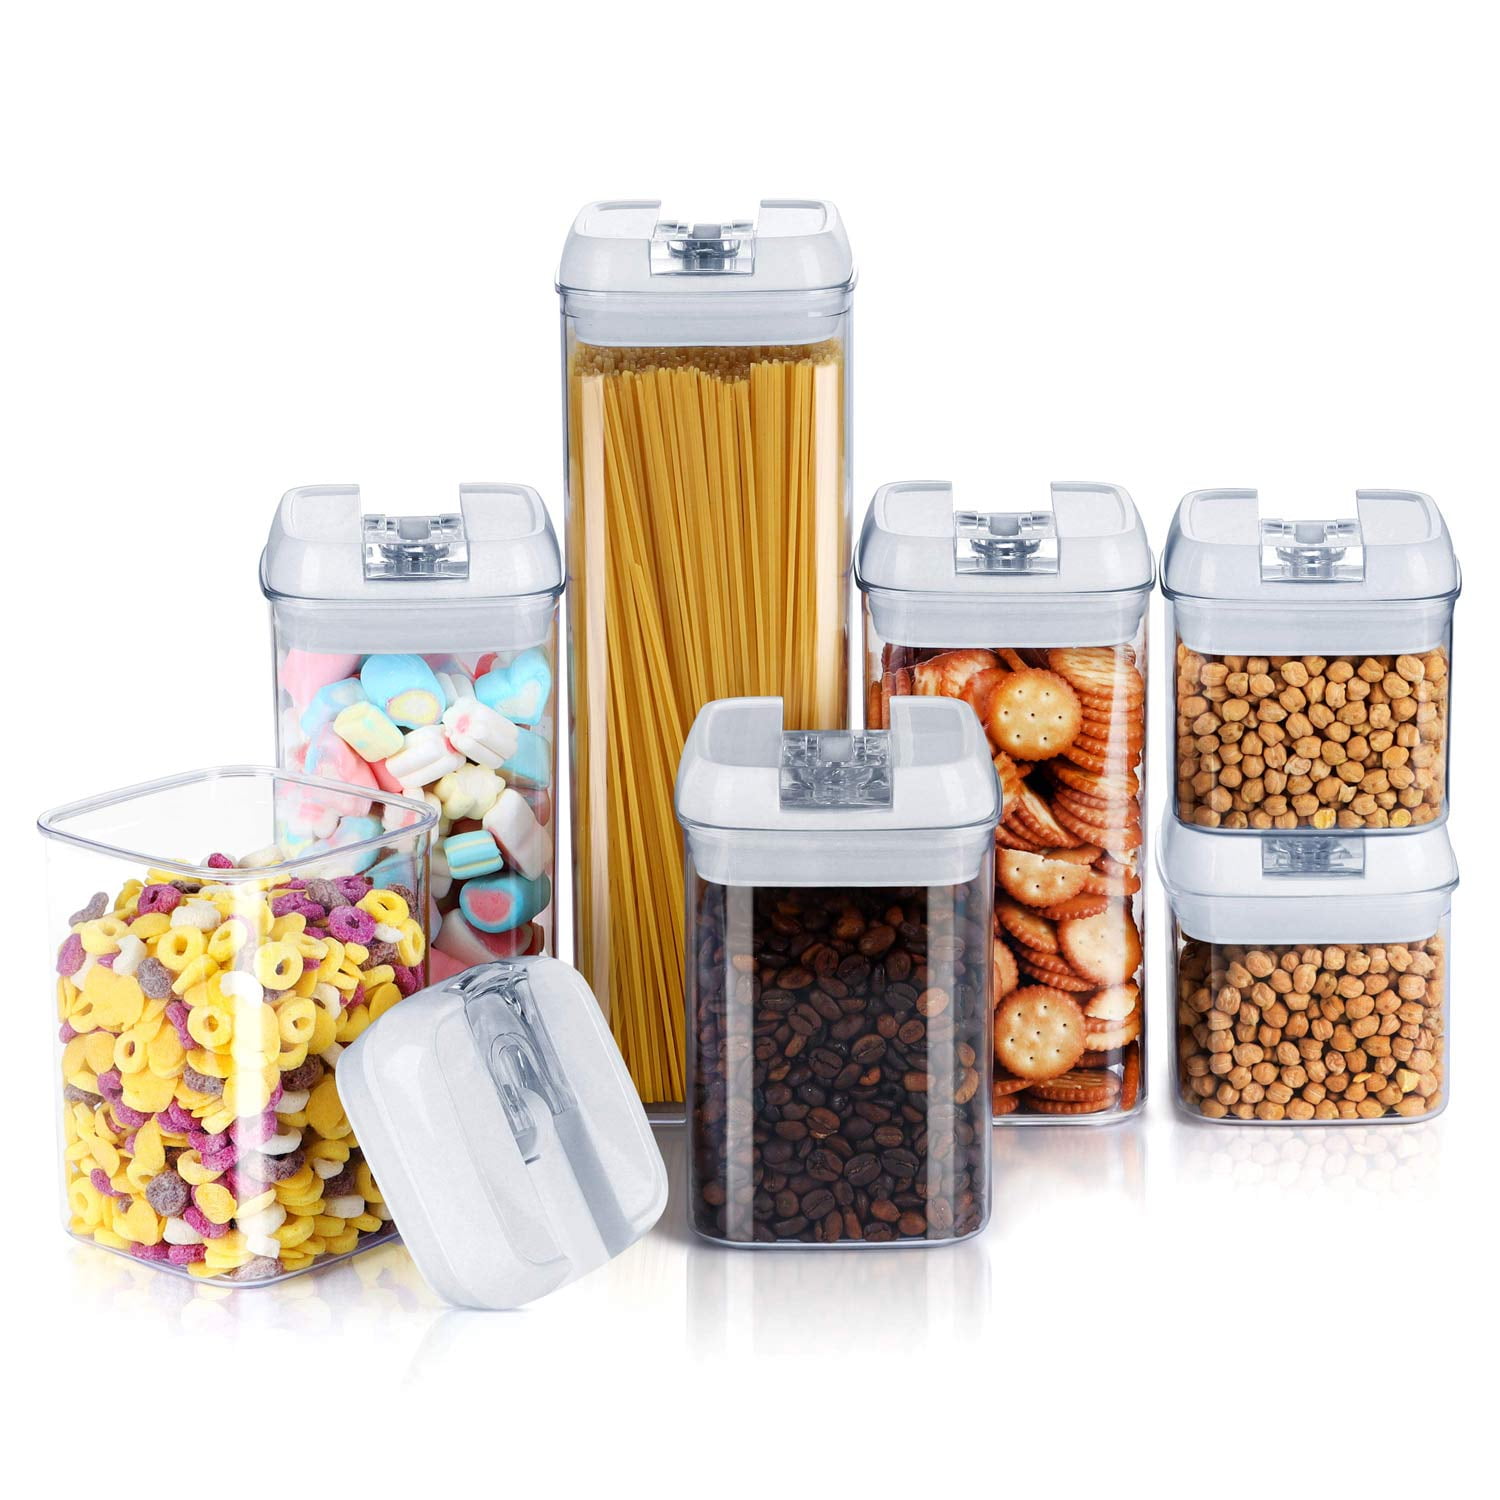 THE CLEAN STORE Cereal Containers Storage Set, Basic, Clear, 6-Piece 321 -  The Home Depot